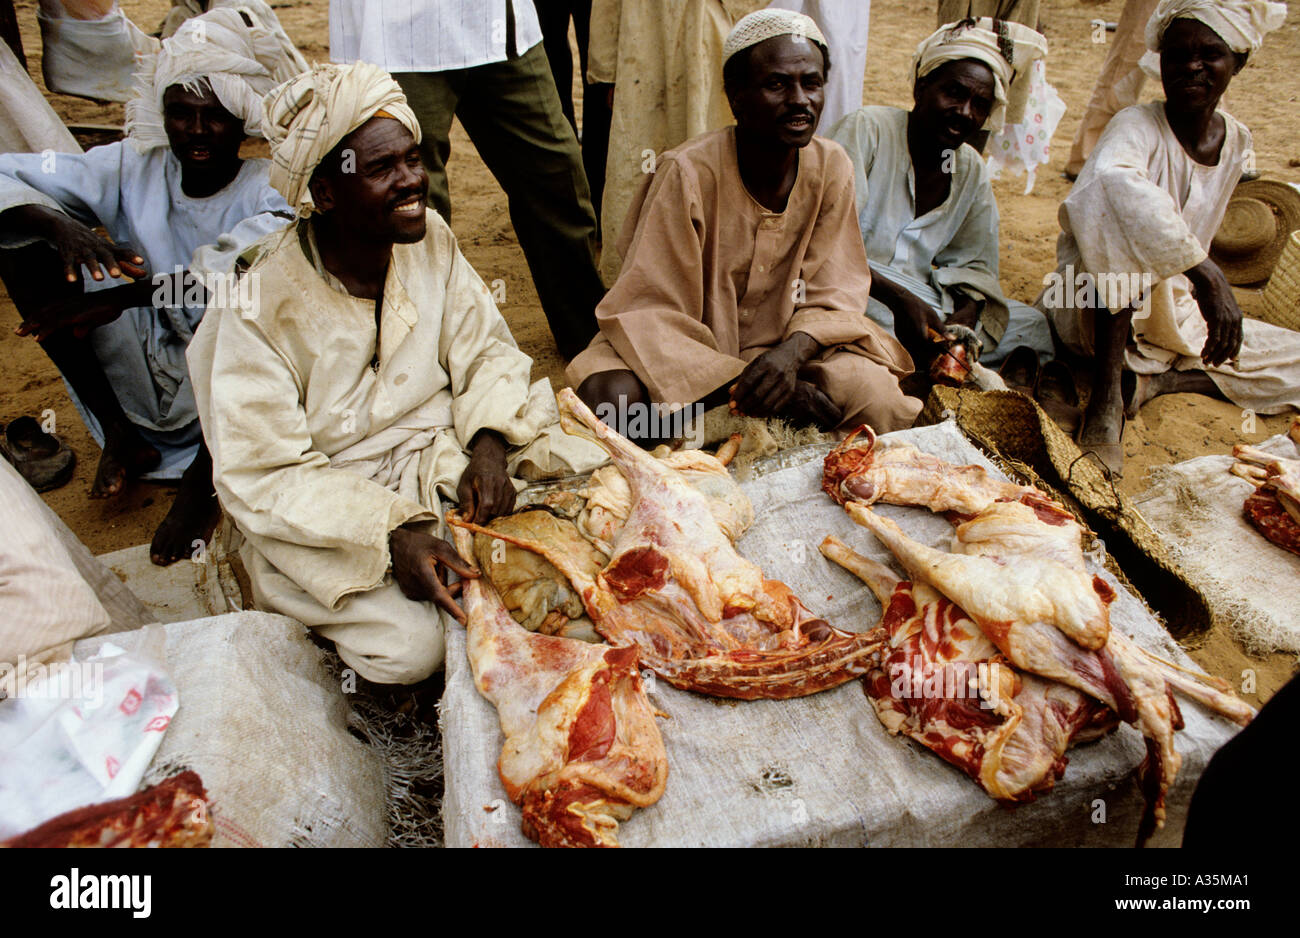 Sudan.Trading post of  El fasher in the Darfur region of western Sudan. Traders with their camels cut up meat for food. Stock Photo